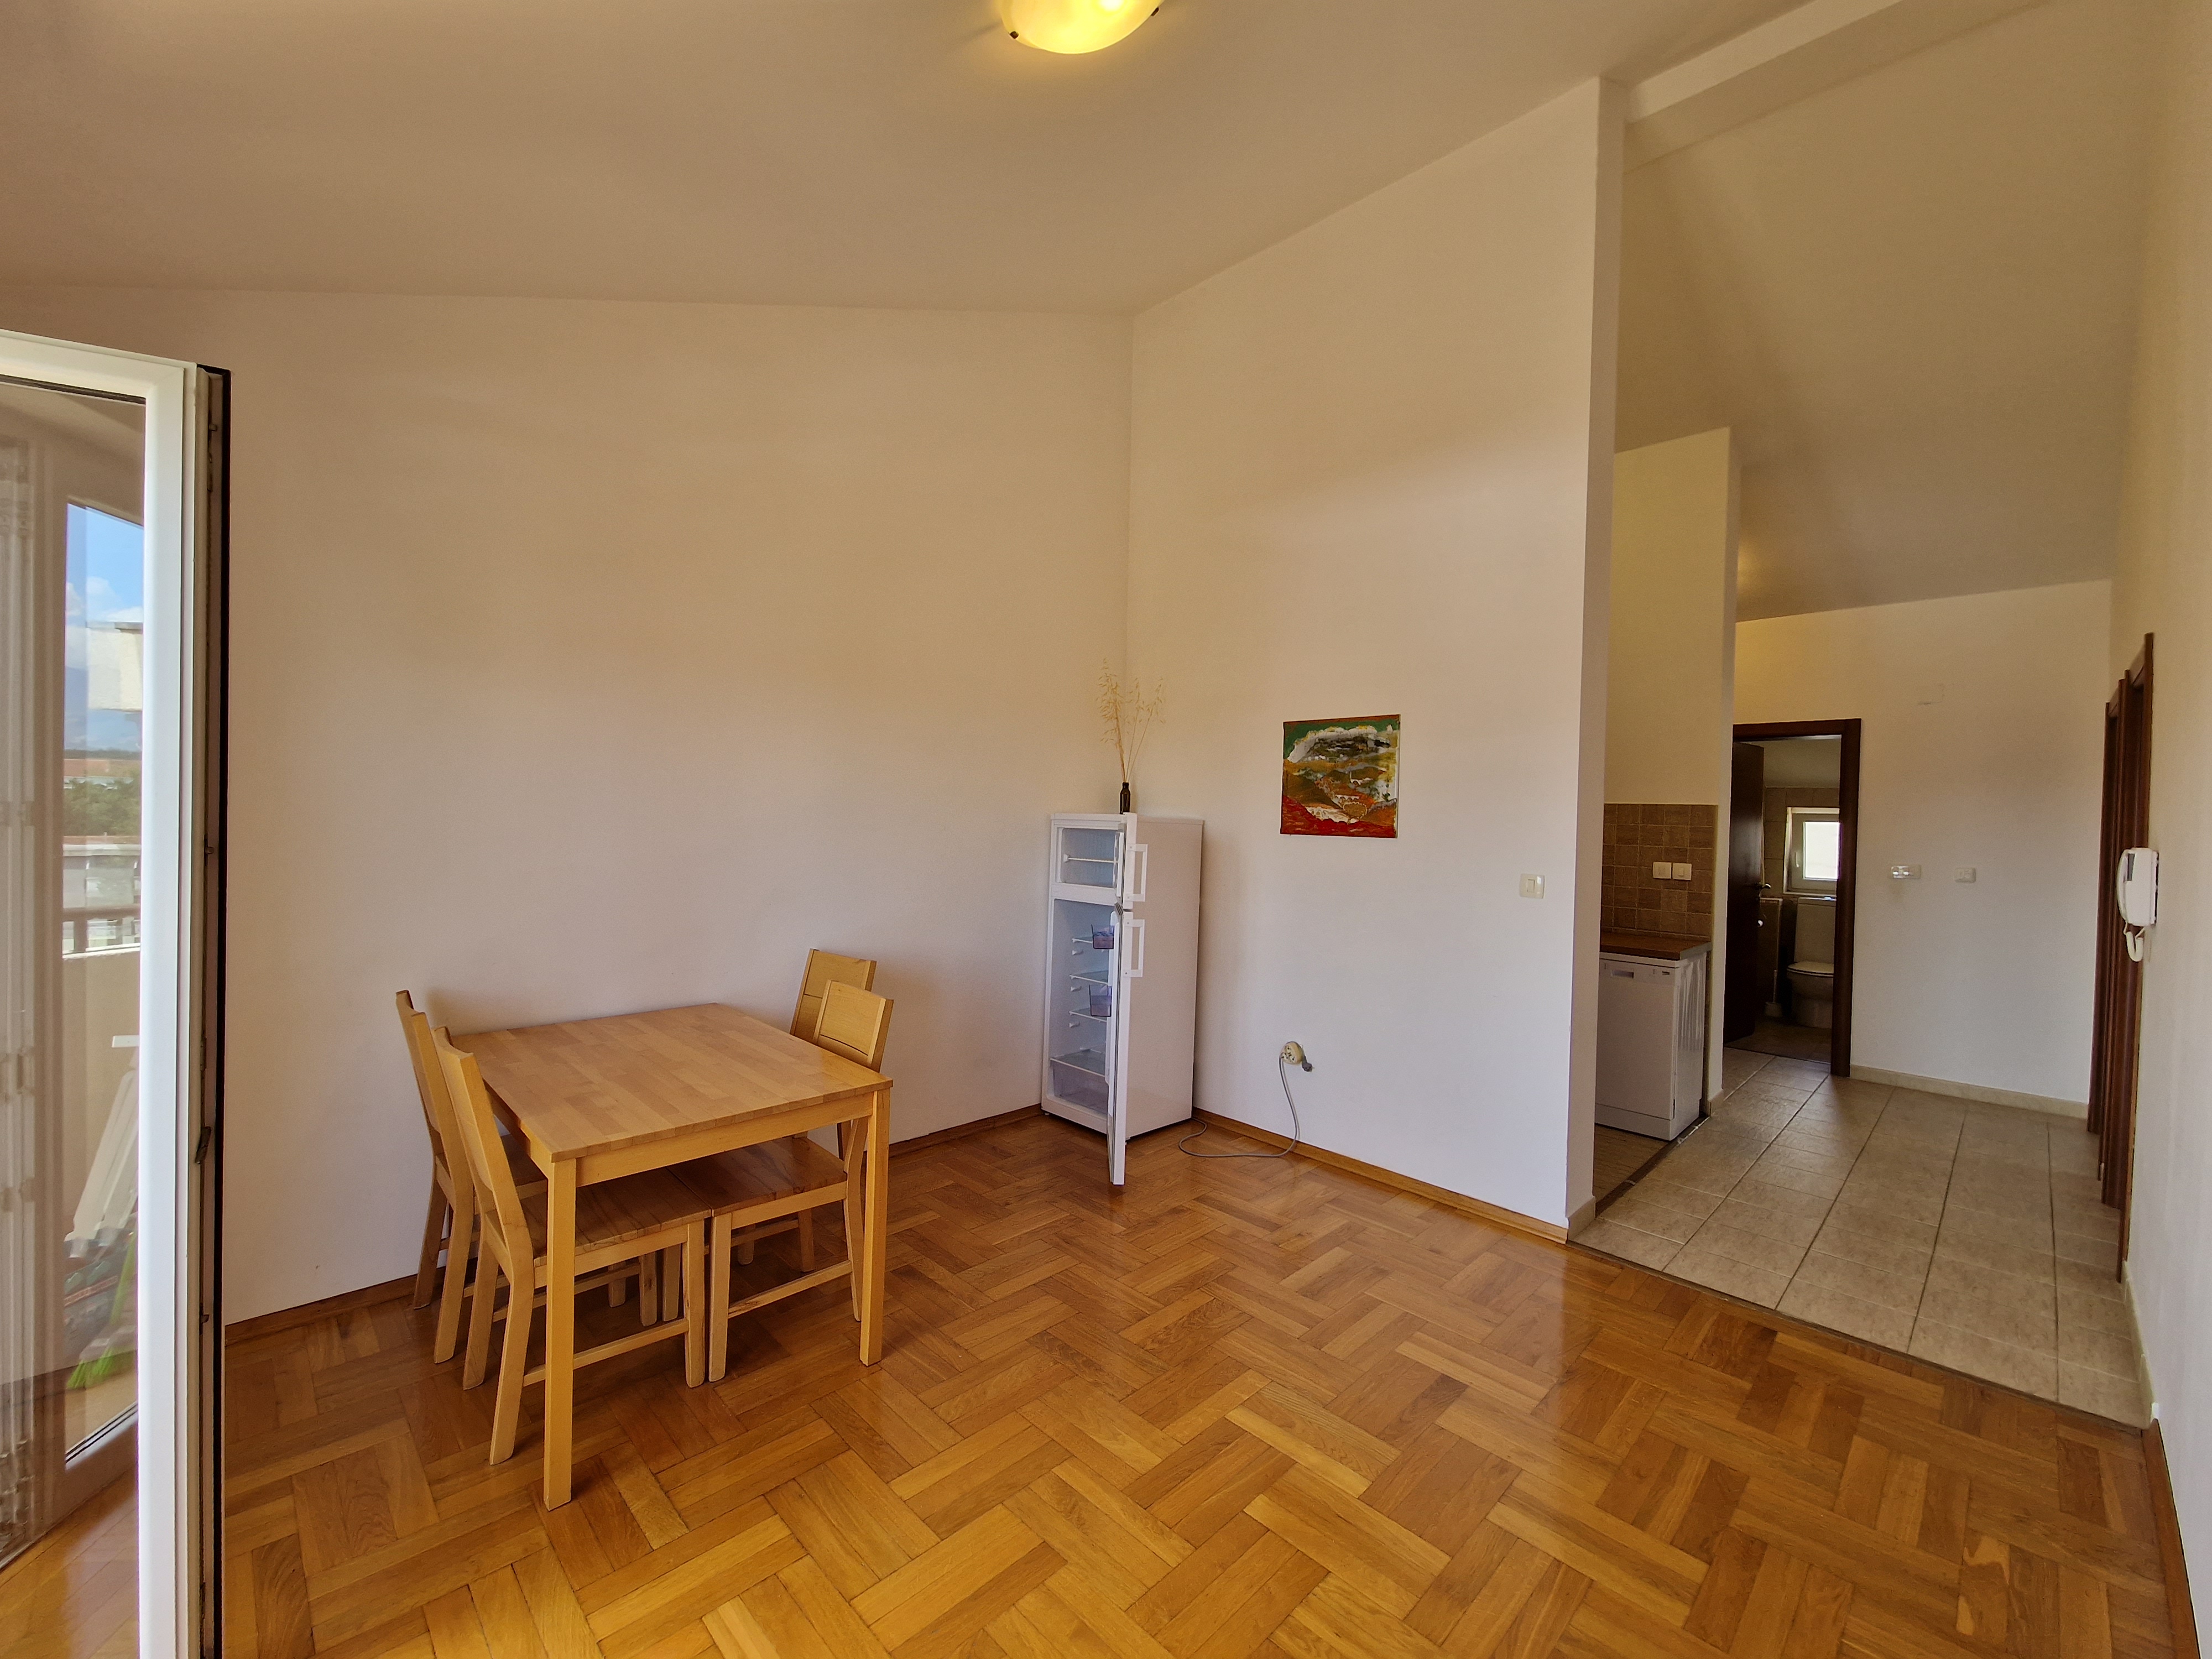 Super offer! Two-bedroom apartment with a terrace in Tivat